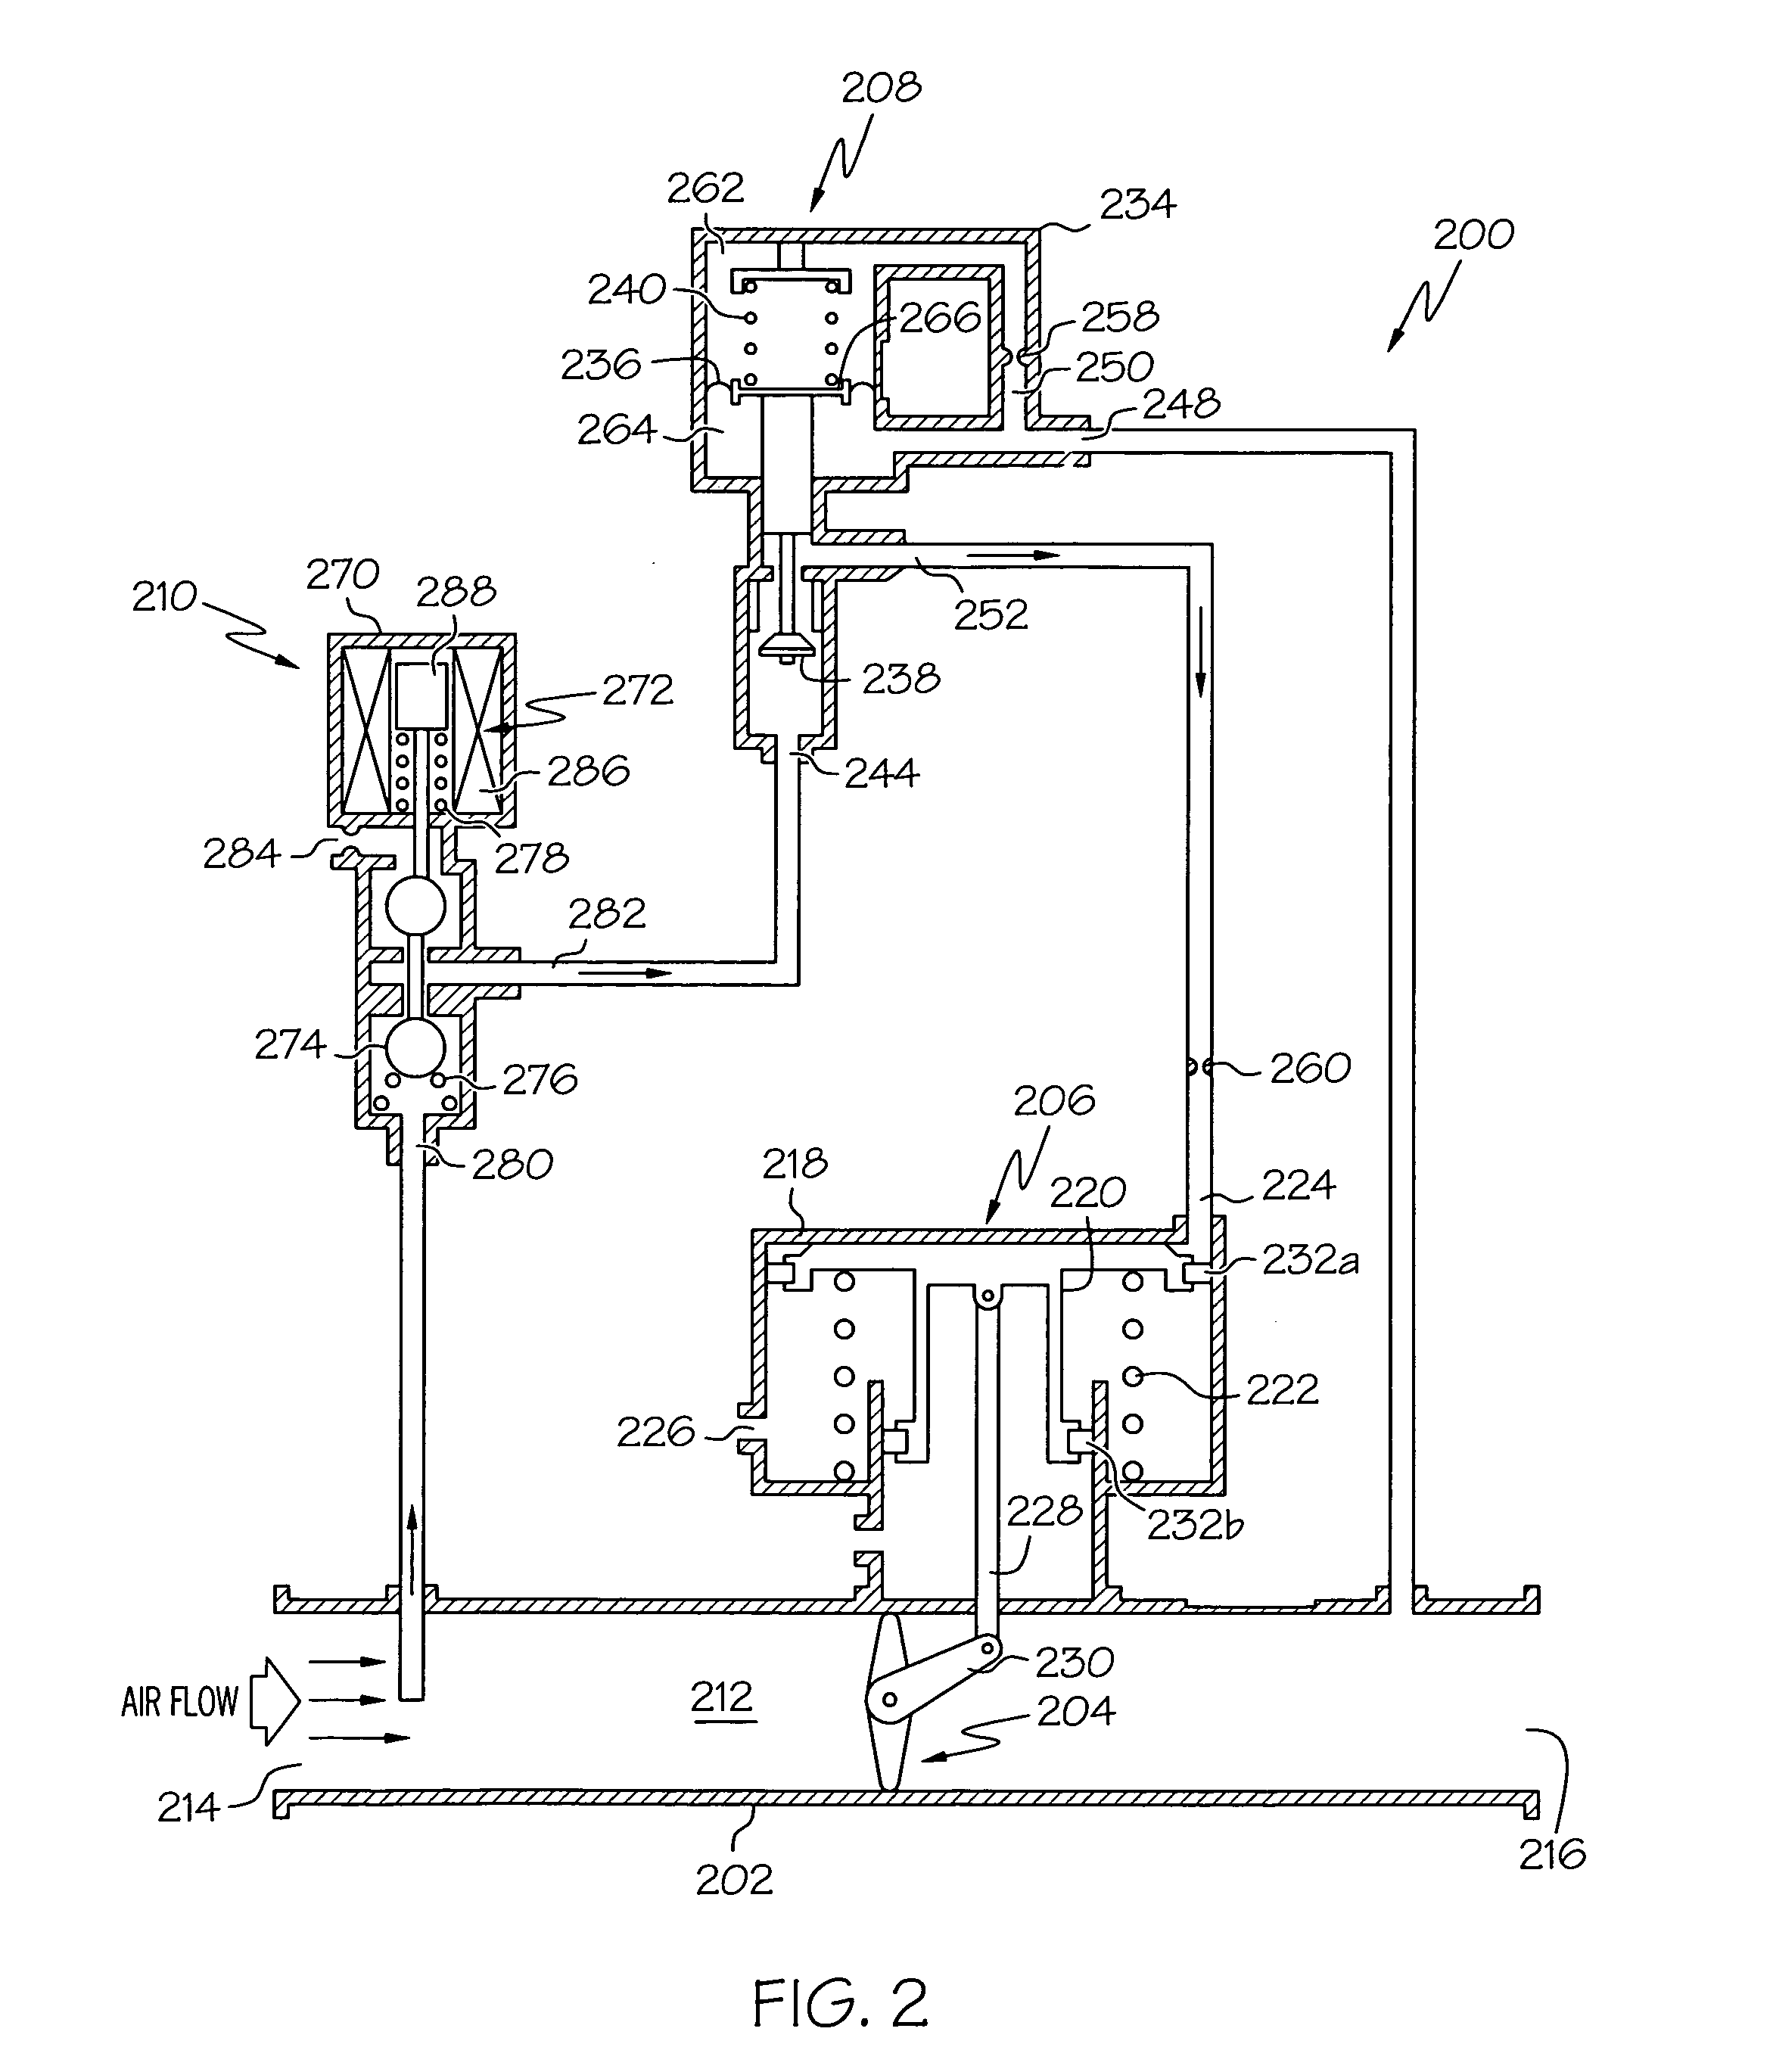 Pneumatic valve control using downstream pressure feedback and an air turbine starter incorporating the same